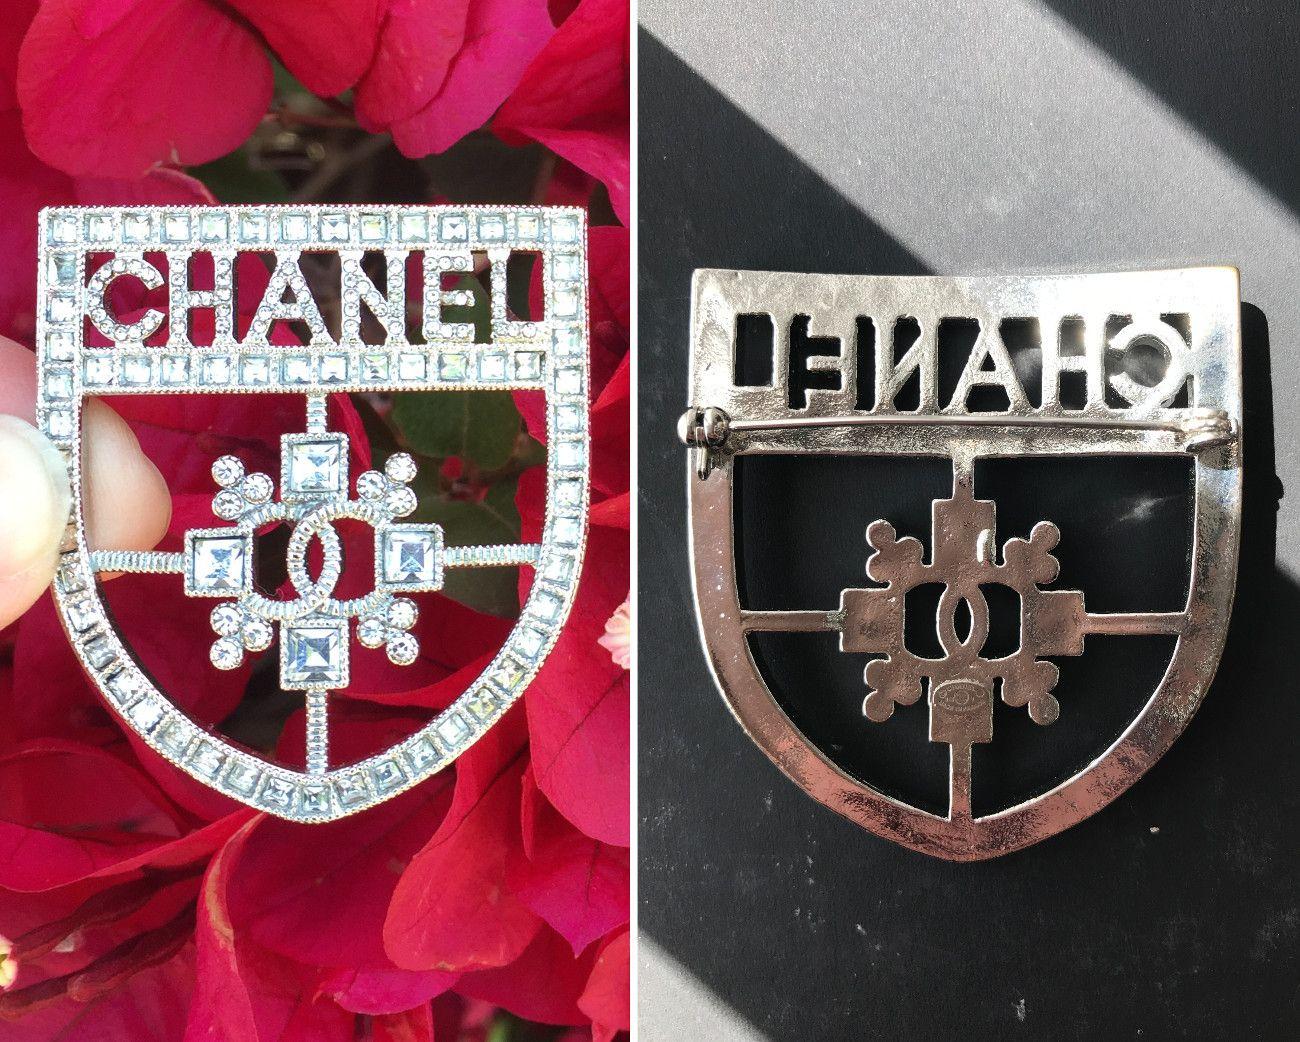 Fake Chanel Logo - The Tale of the Fake Chanel Pin Brooch